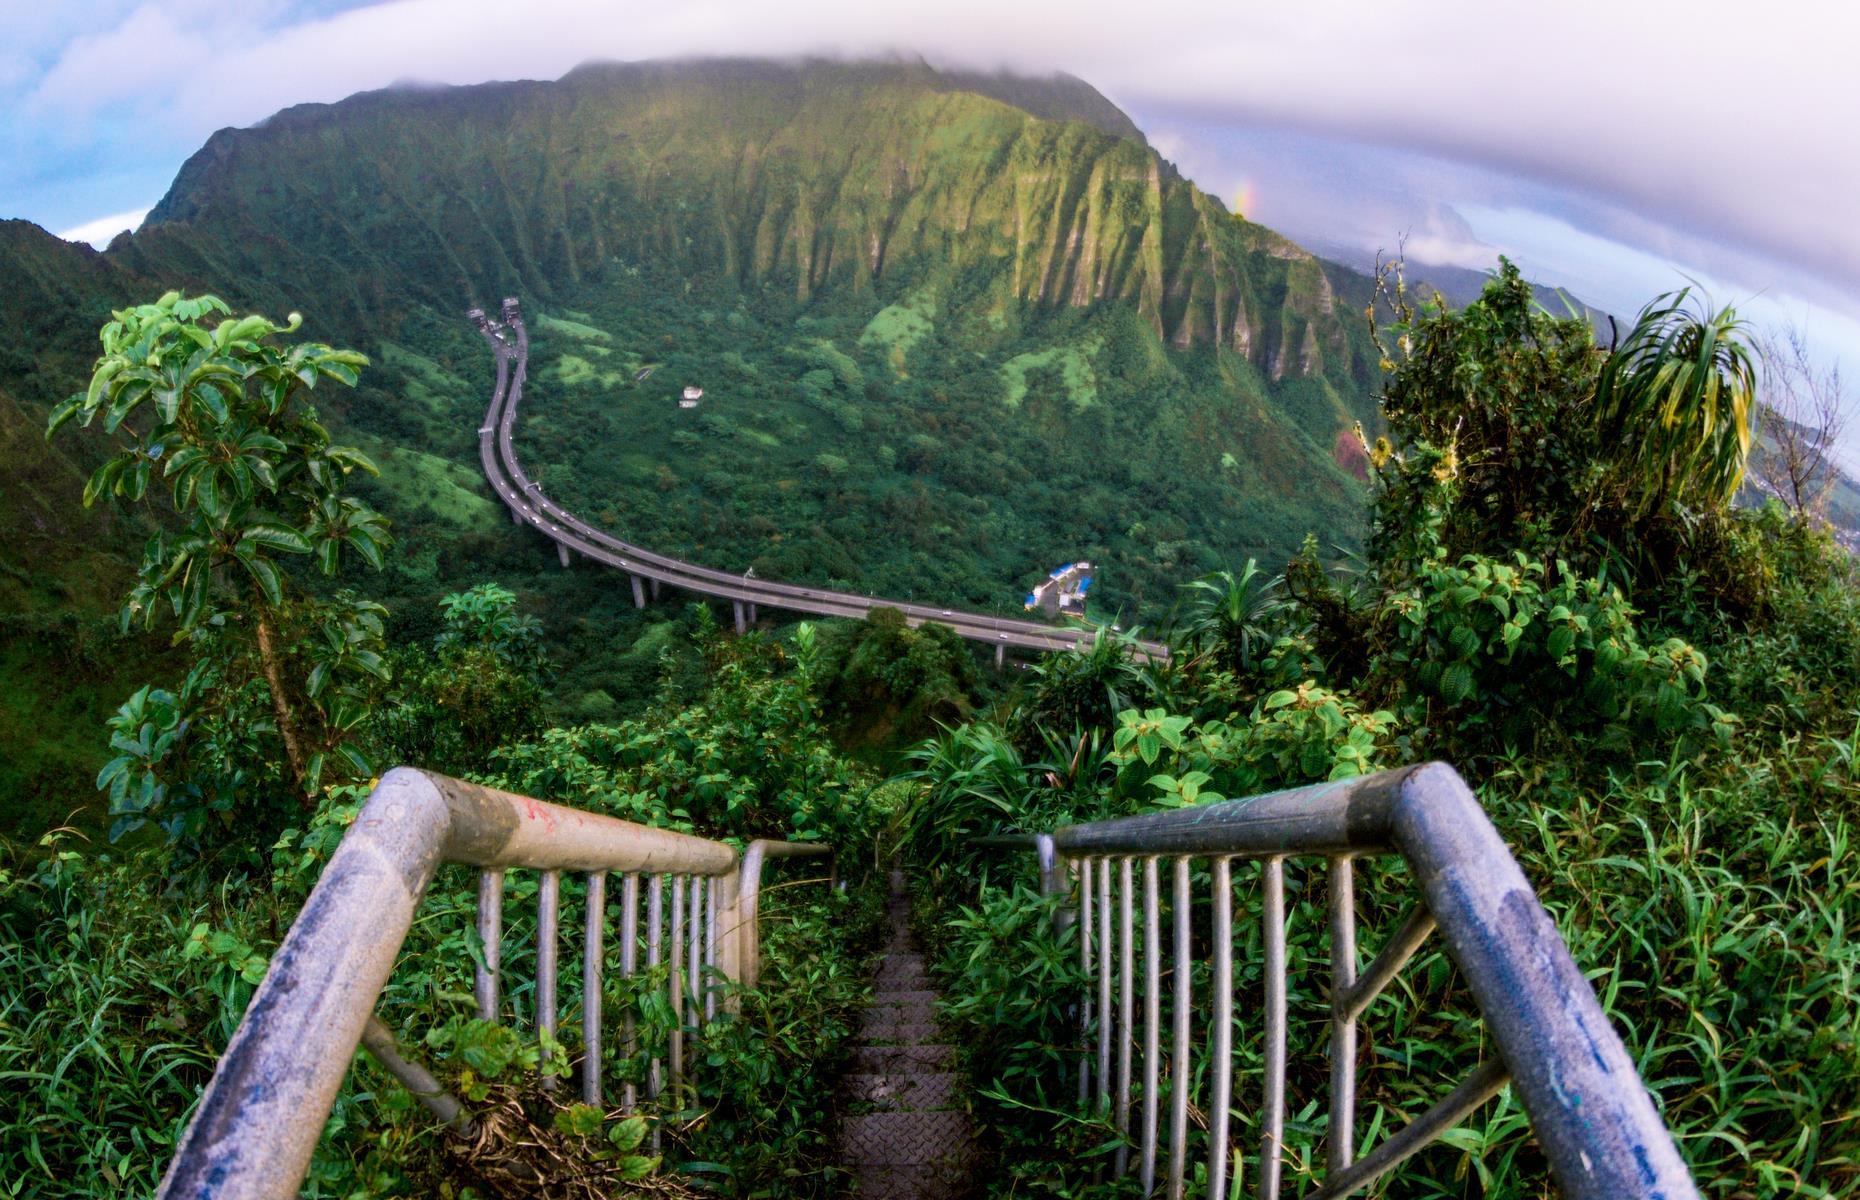 Built in 1942 by the US Navy, this dizzying staircase lines Oahu’s green Ko’olau mountains and is nicknamed the 'Stairway to Heaven' for good reason. But with rising safety concerns, the stairs have been closed to the public for several years (with hefty fines for trespassers), and in 2022 it was facing demolition.